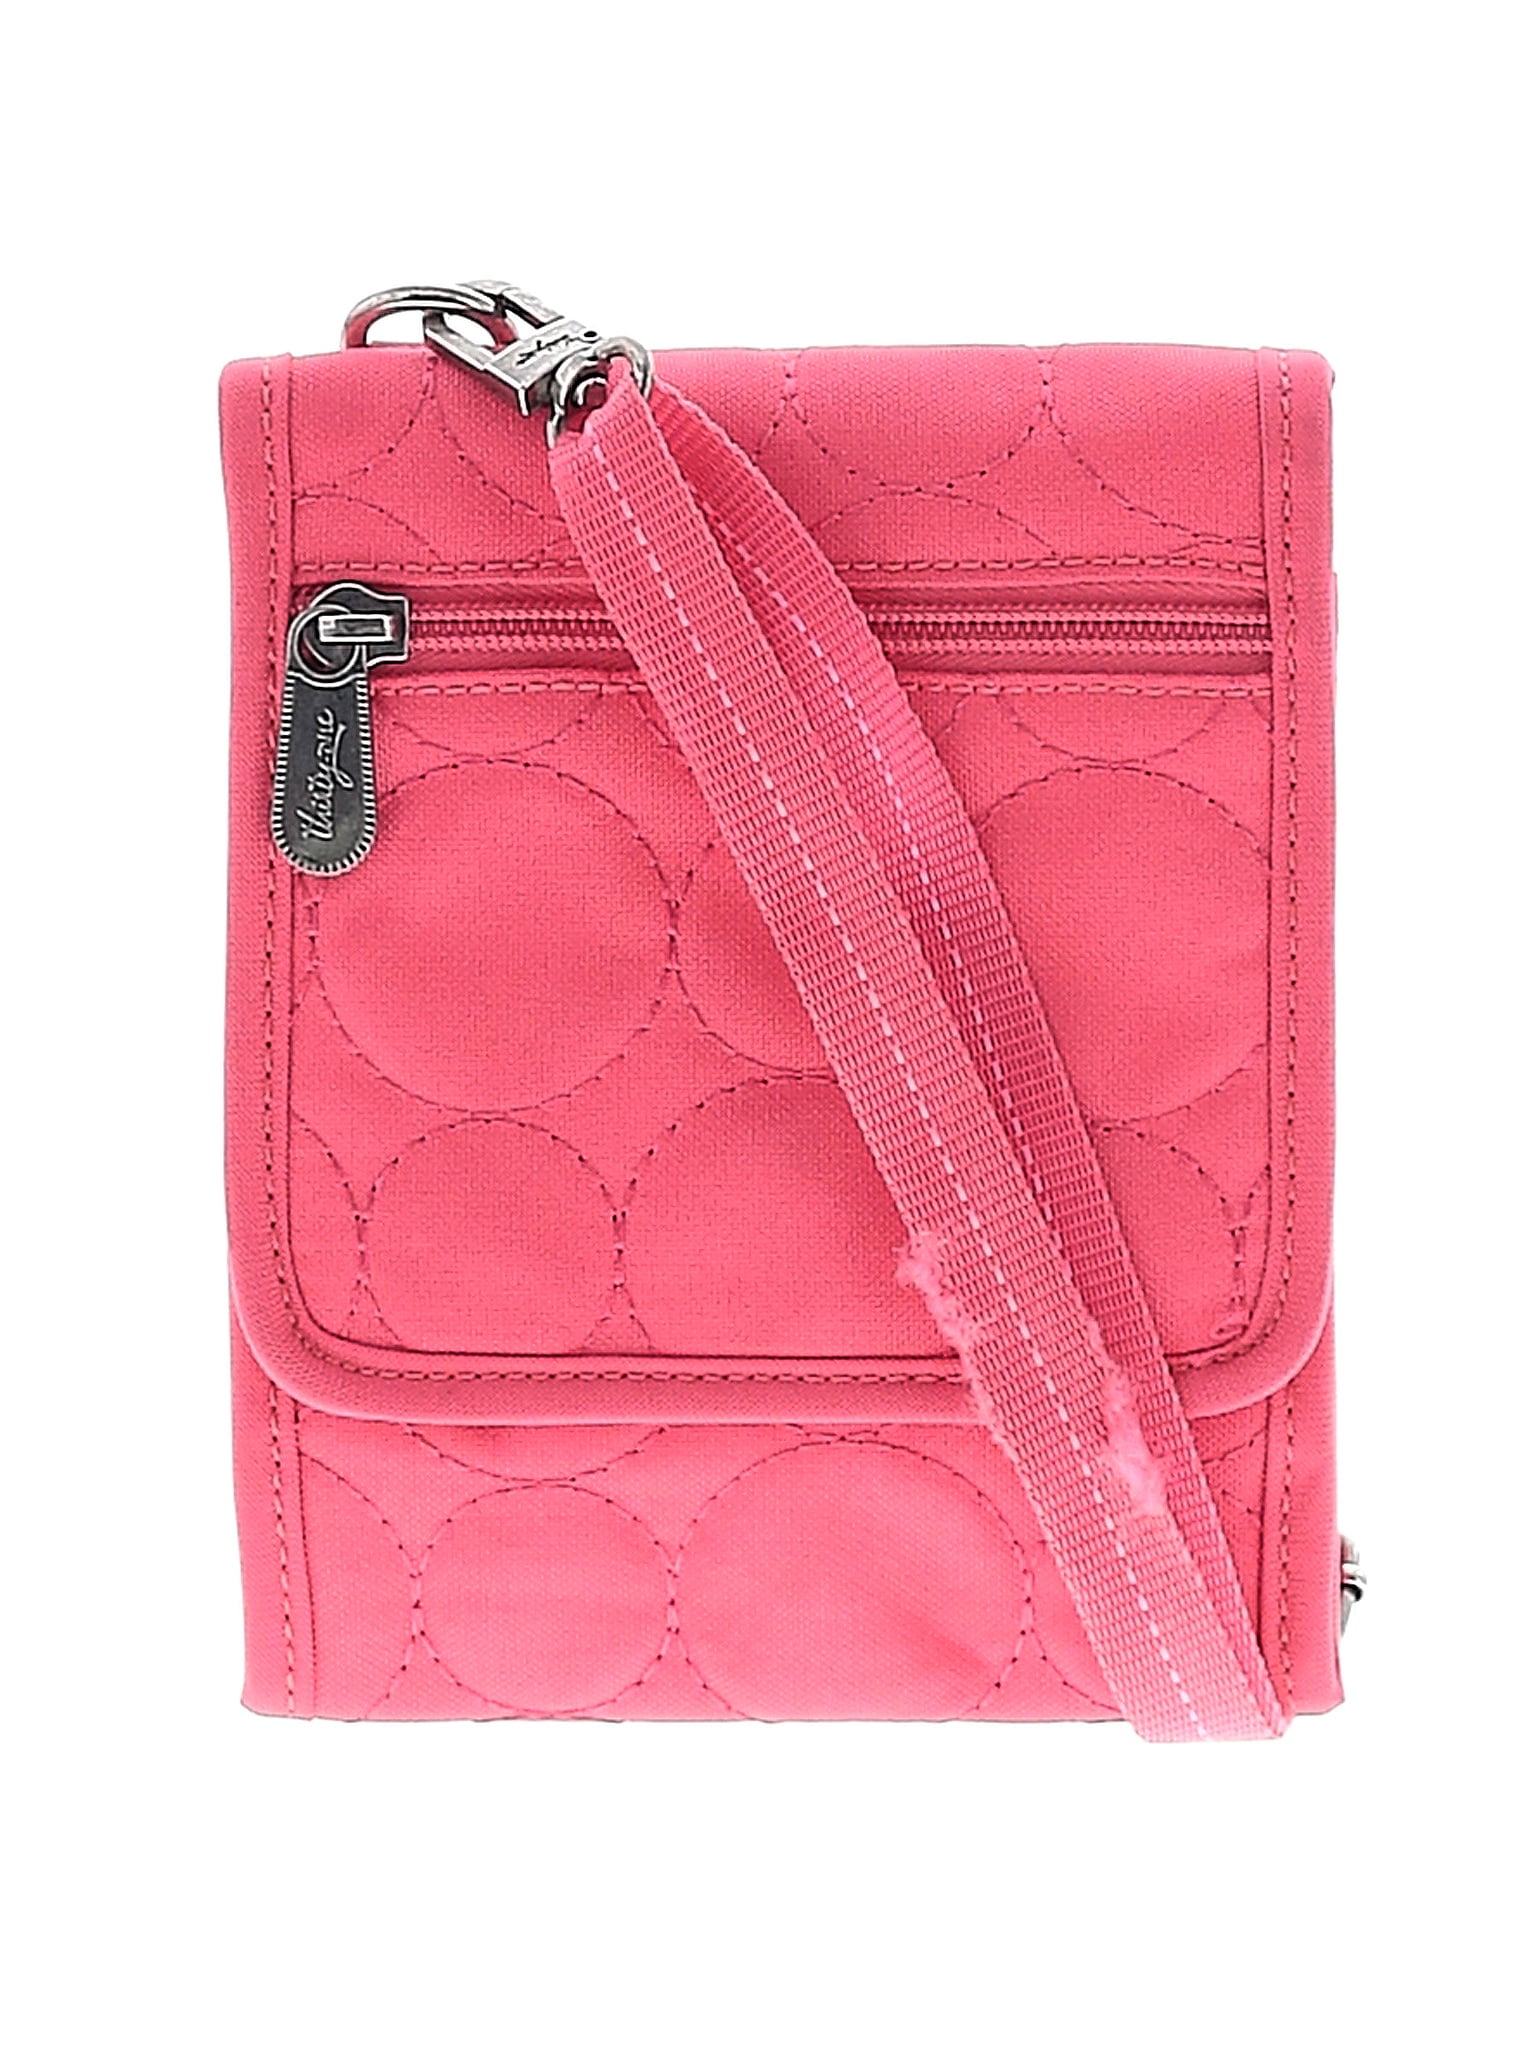 Thirty-One Crossbody, Call Me Crossbody Purse in Rio Weave *Retired Pa –  Rose Gold Retail